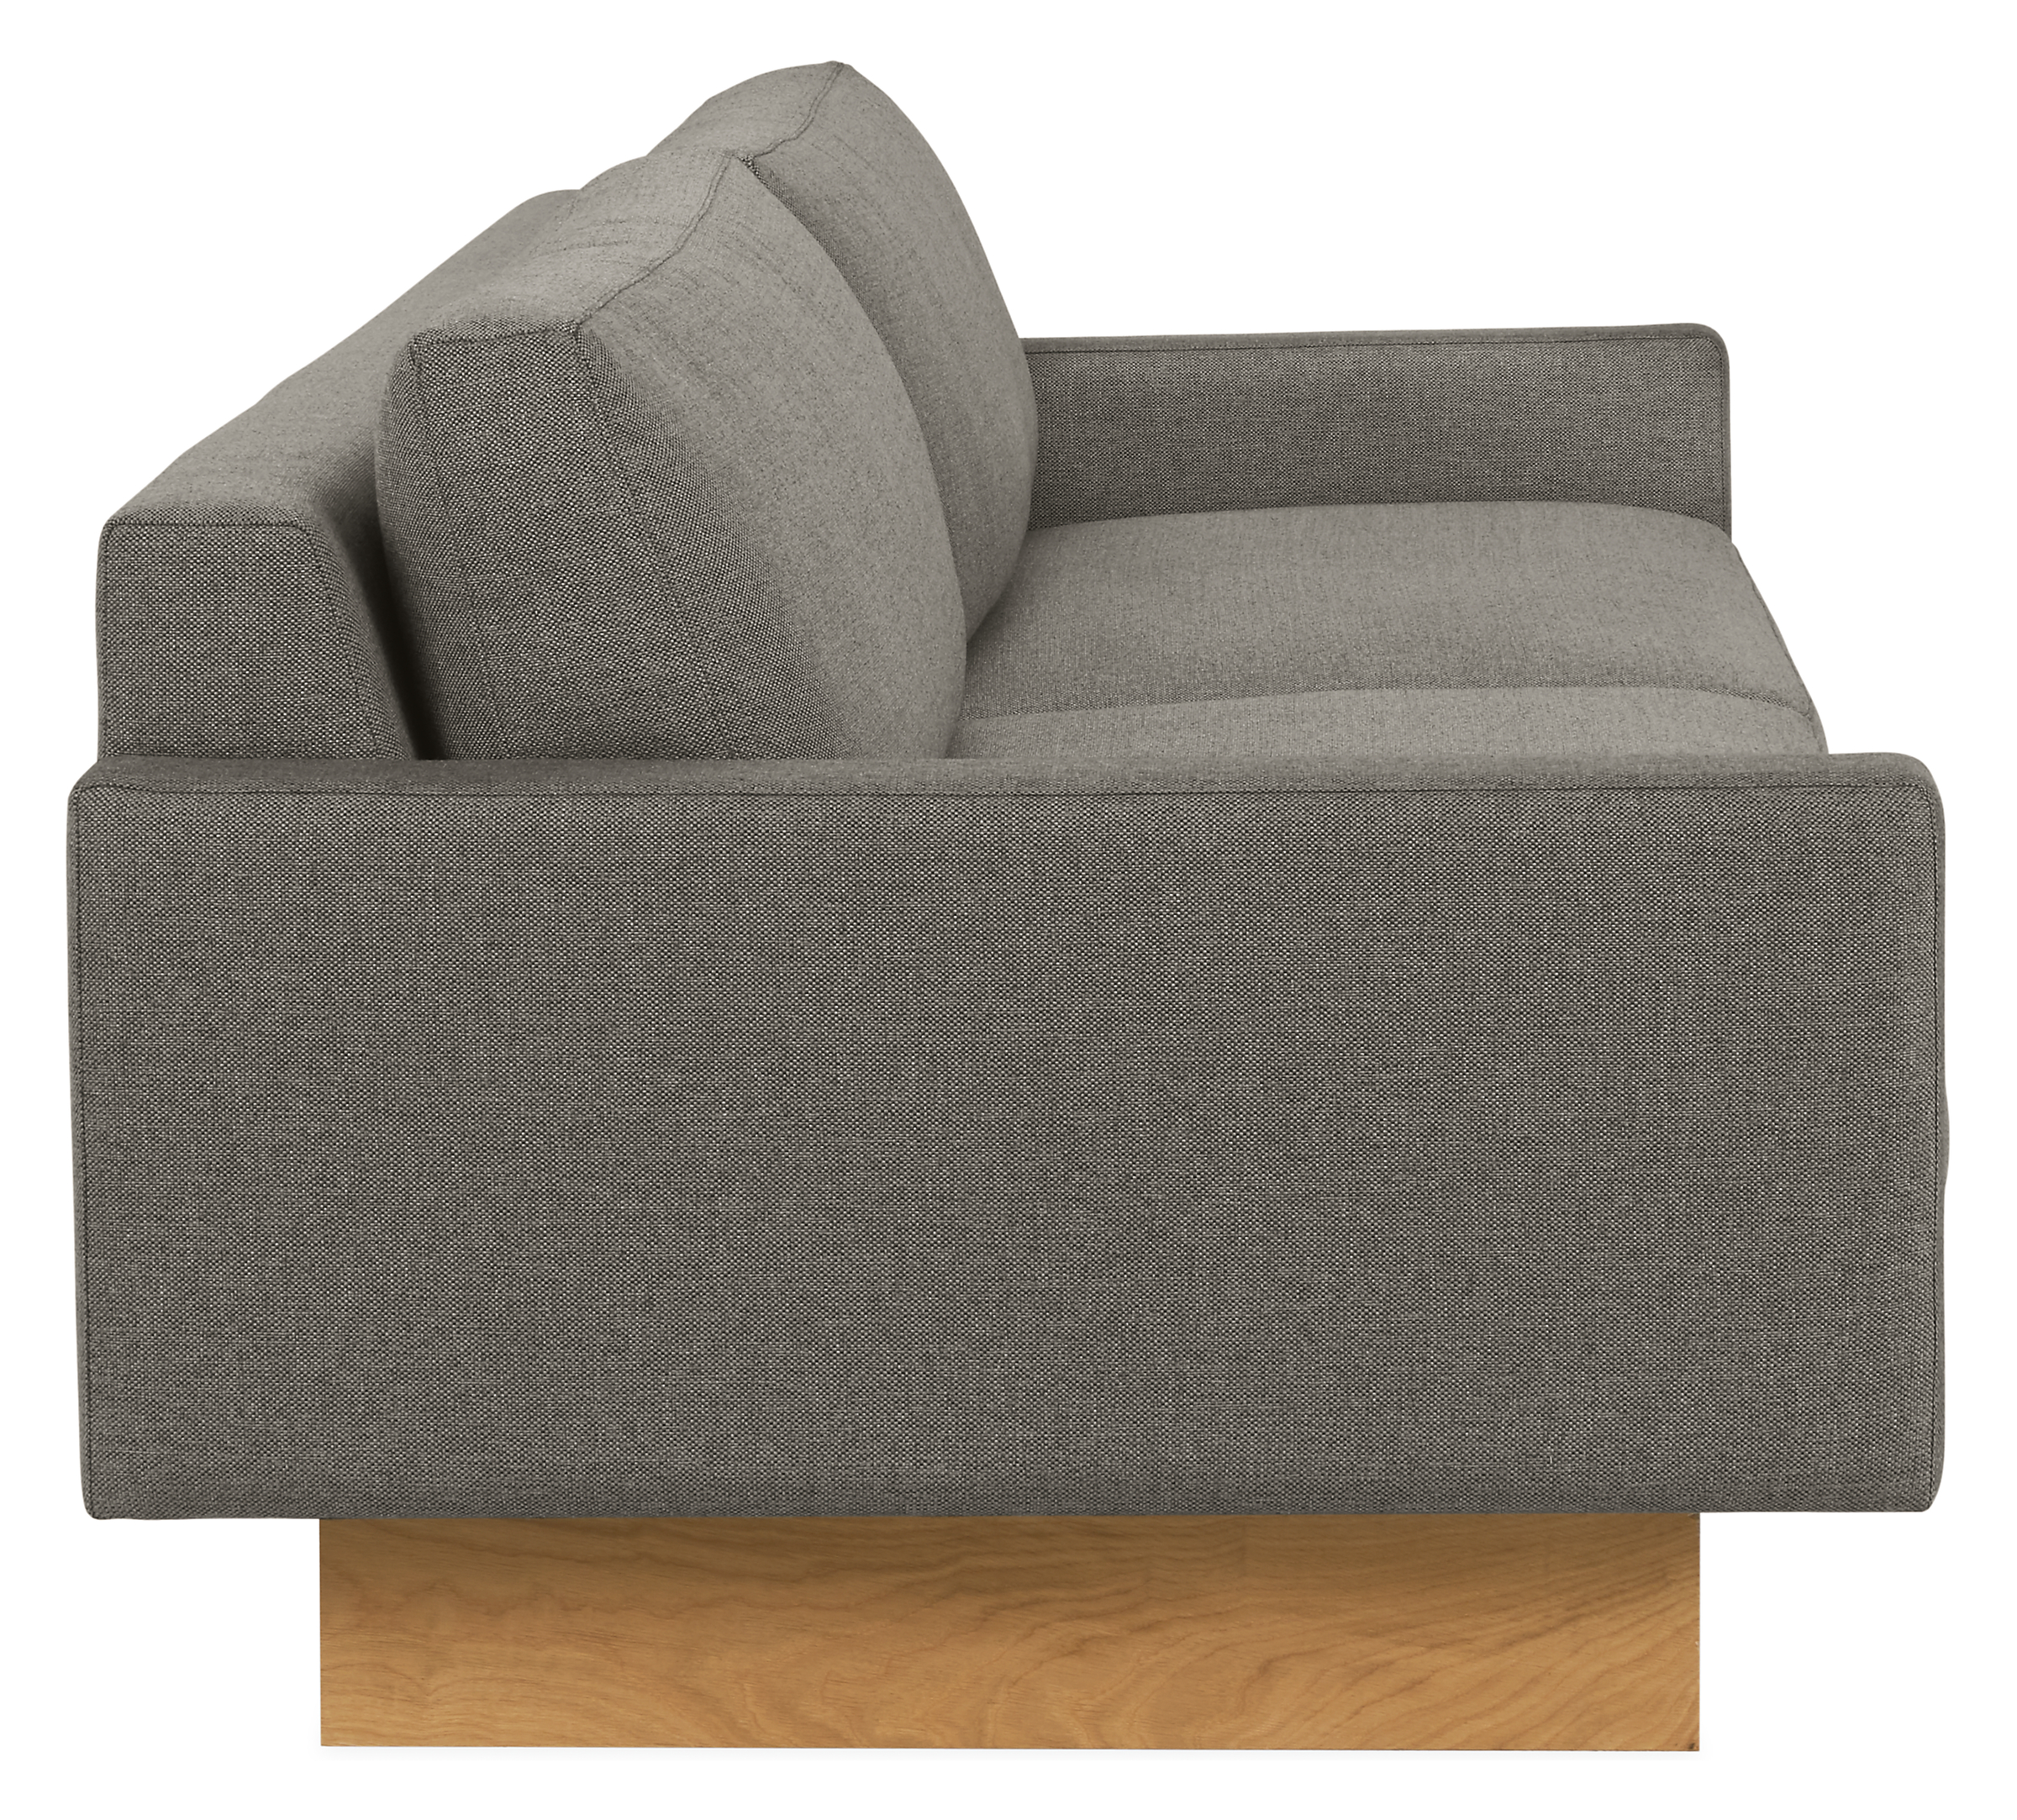 Side view of Pierson 102" Sofa in Sumner Fabric with Wood Base.